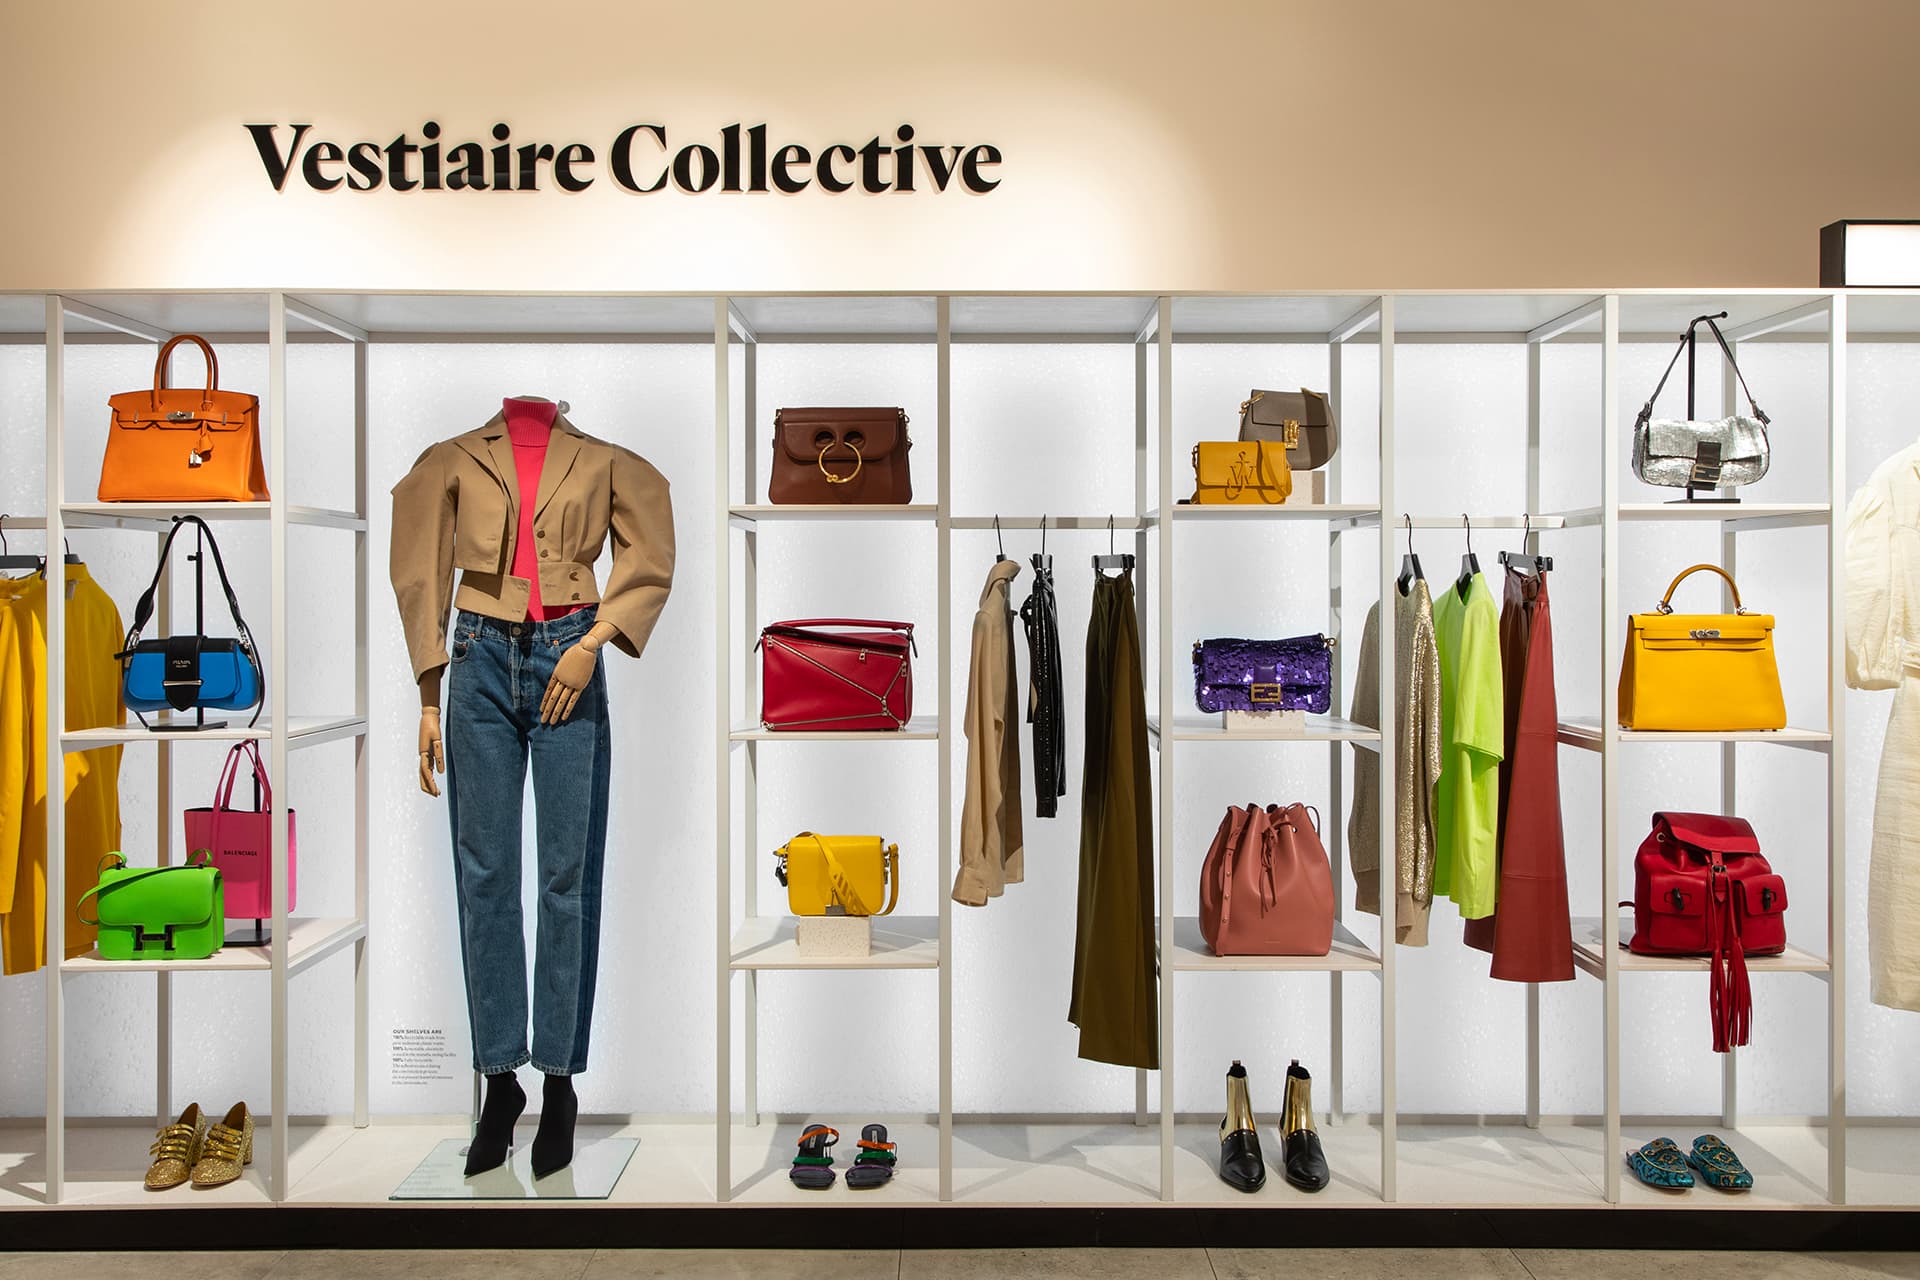 Rebranding for luxury resale site Vestiaire Collective - Retail in Asia